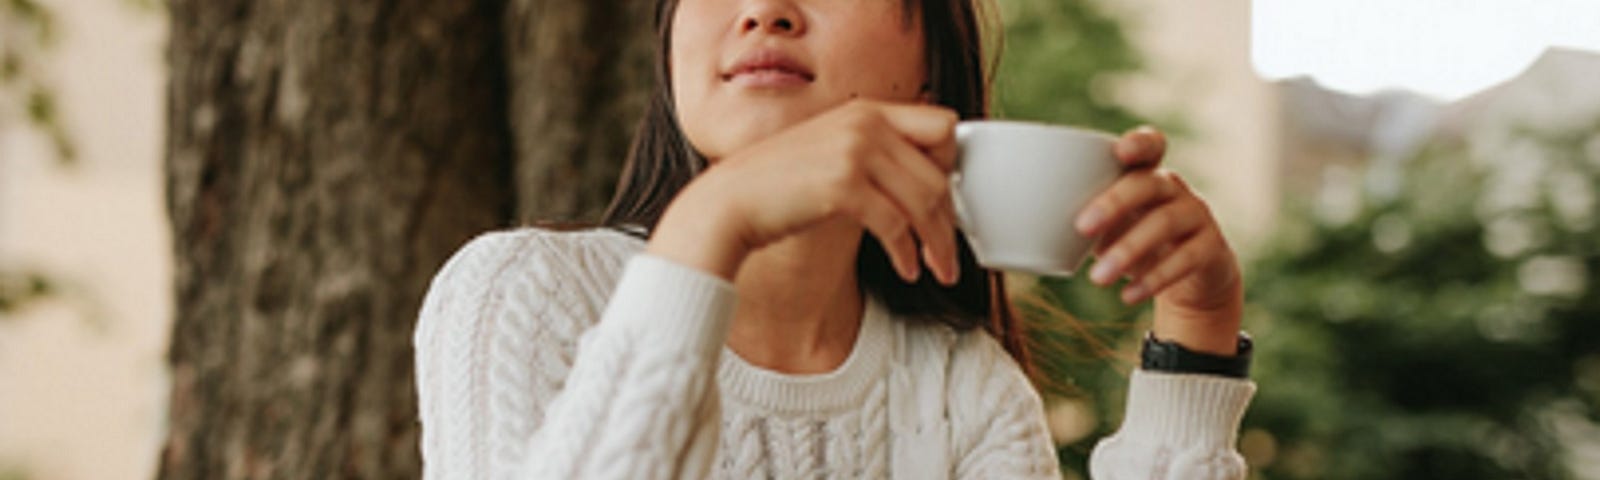 Asian women deep in thought, having coffee alone at outside table.